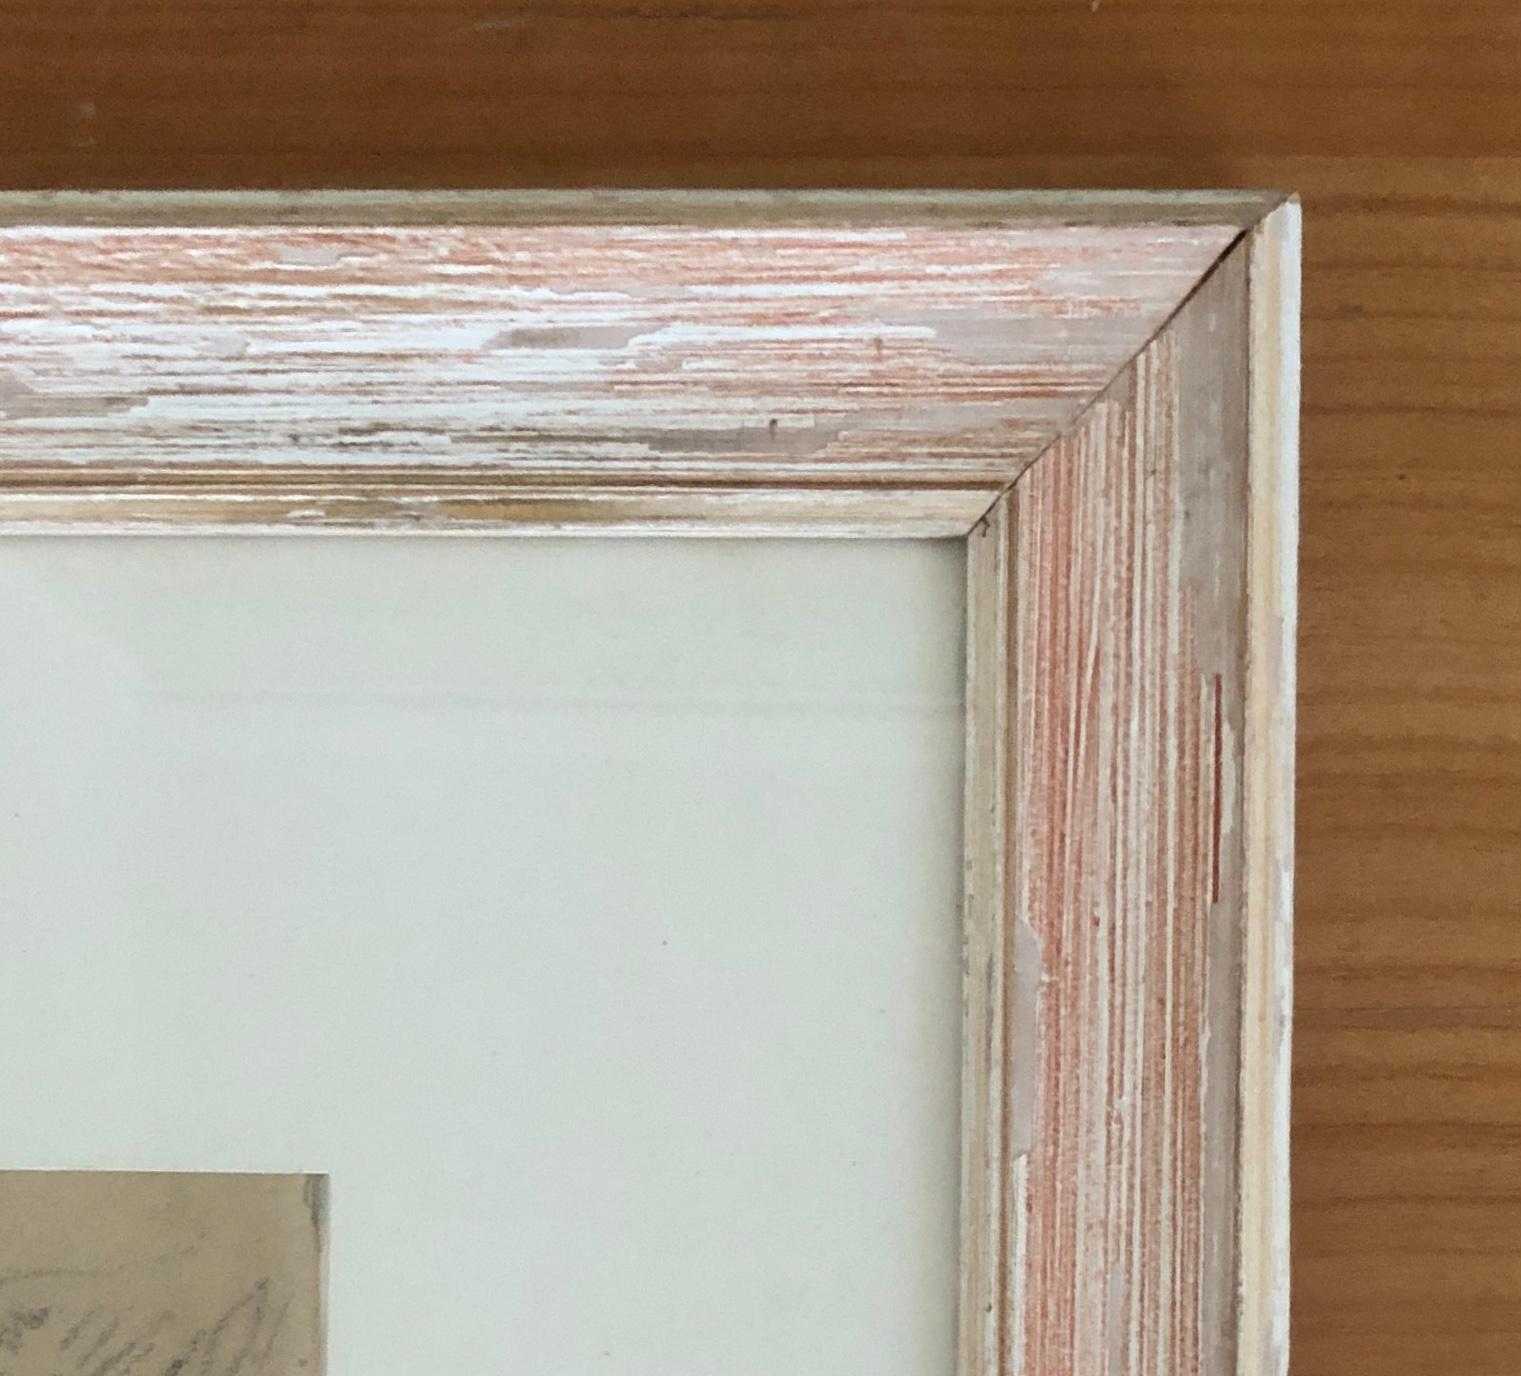 Work dedicated by the artist for one of his friend

Work on paper
Light pink wooden frame with glass pane
43.5 x 39 x 2 cm